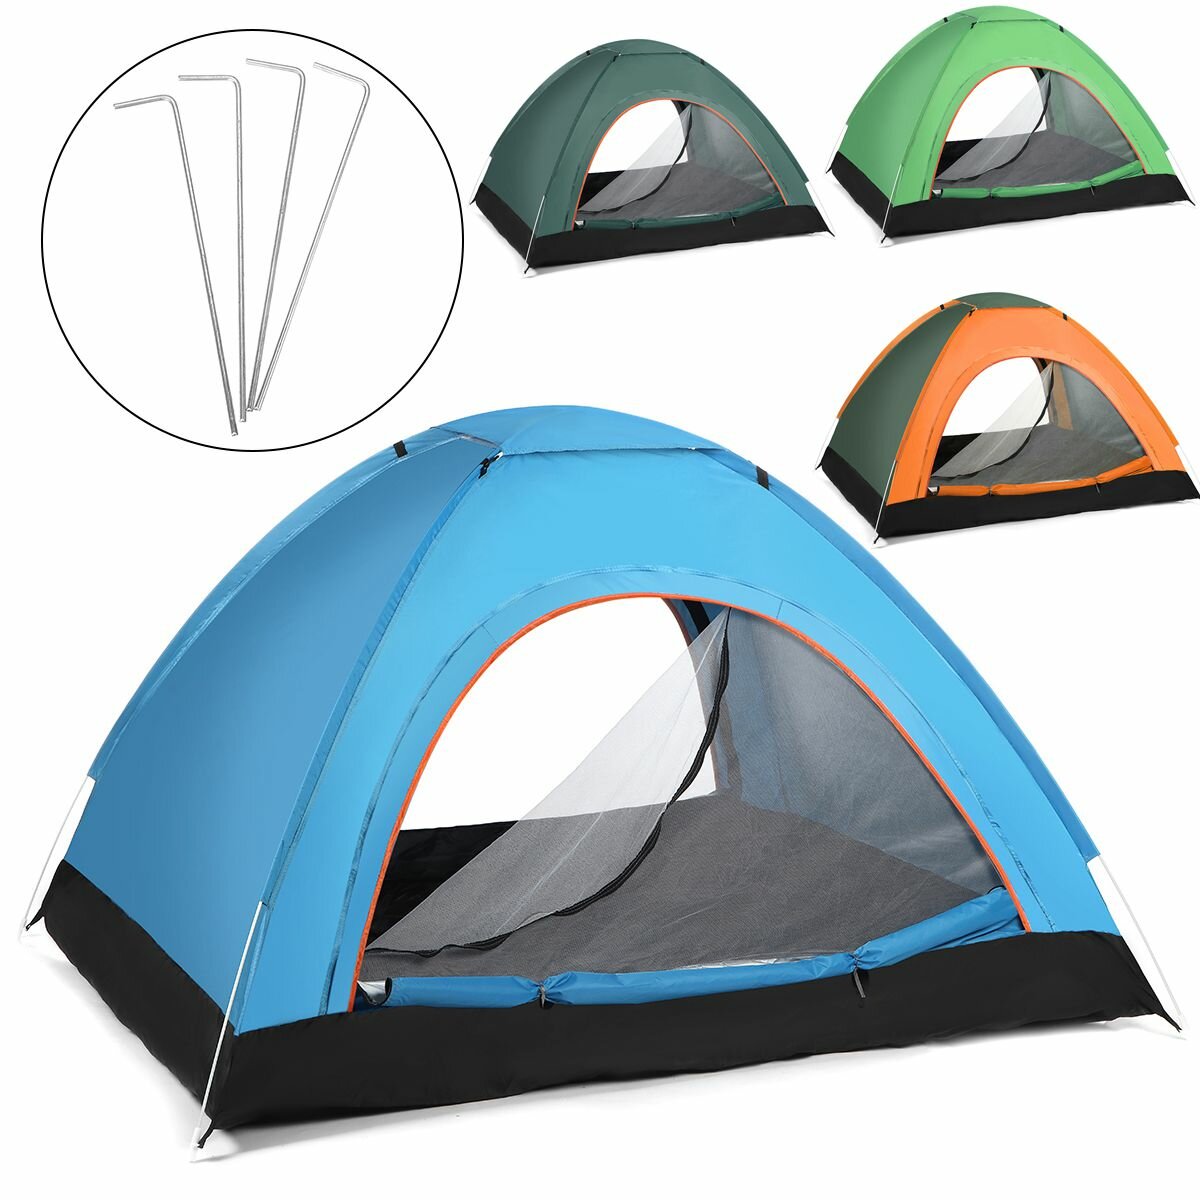 Image of 2-3 Person Full Automatic Anti-UV Windproof Waterproof Camping Tent Outdoor Traveling Hiking Beach Tent